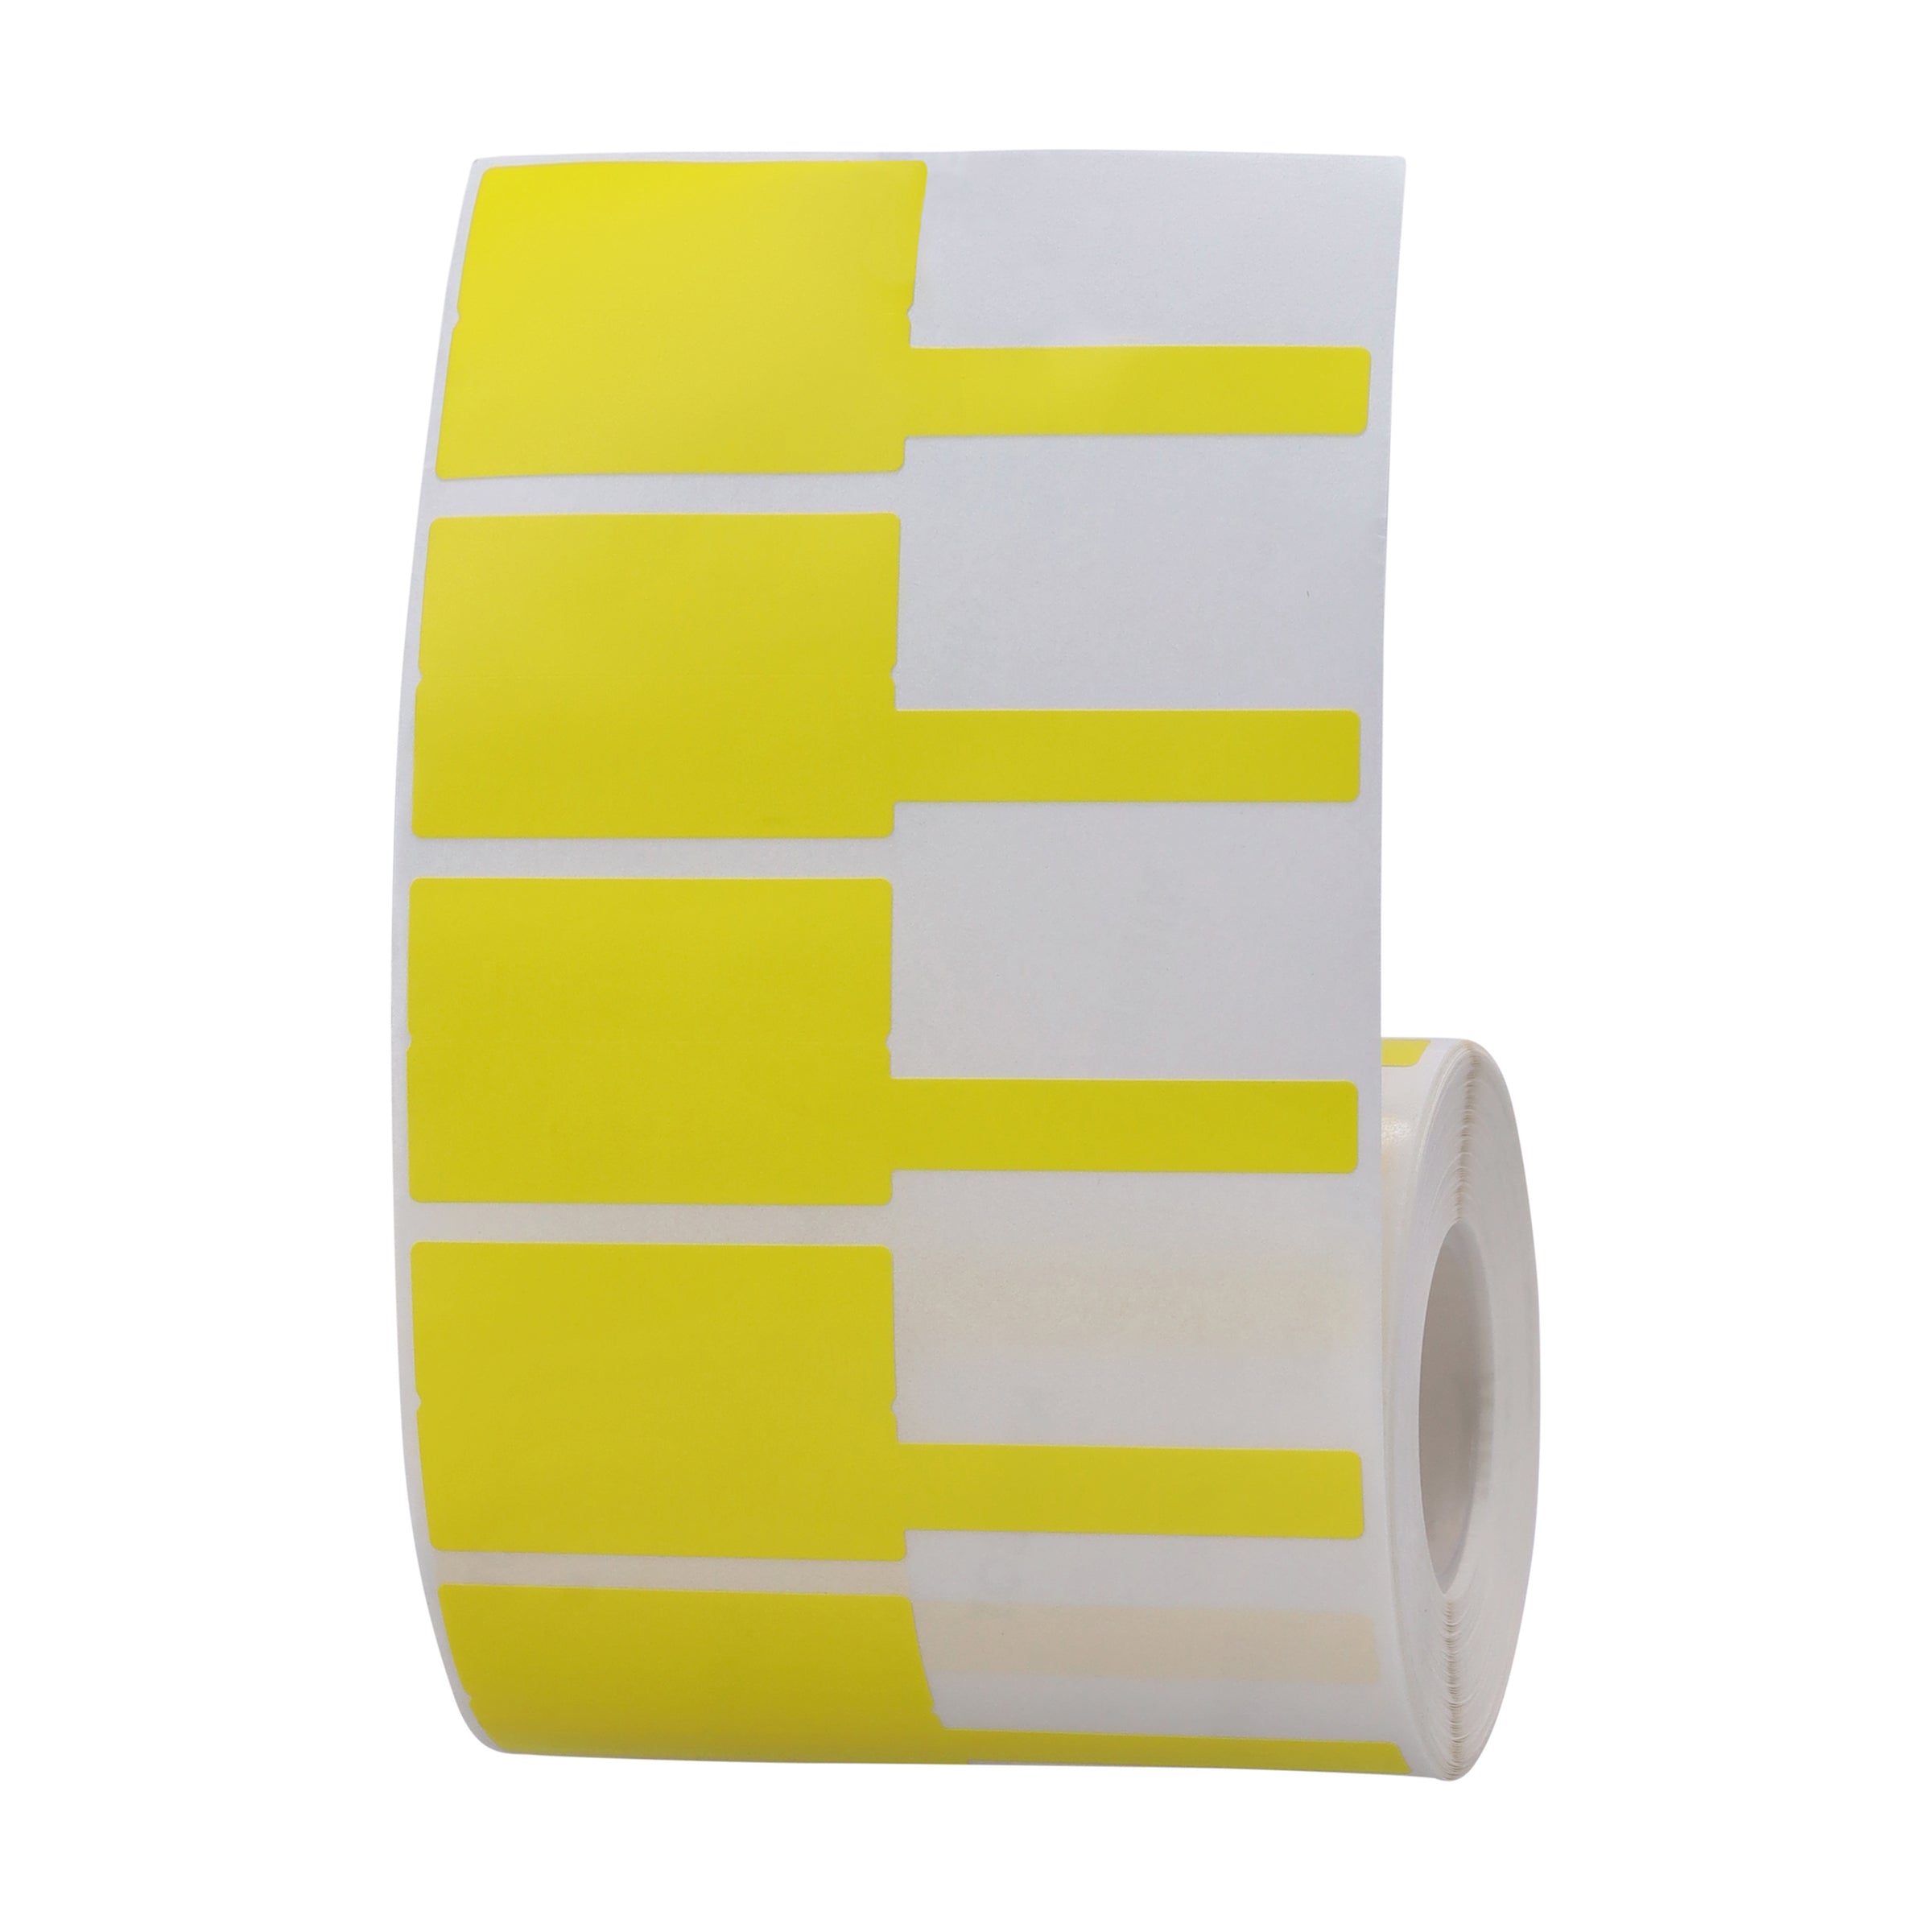 NB484 - NIIMBOT - Z401 ONLY - THERMAL TRANSFER LABELS - P38*25+36-450 YELLOW CABLE